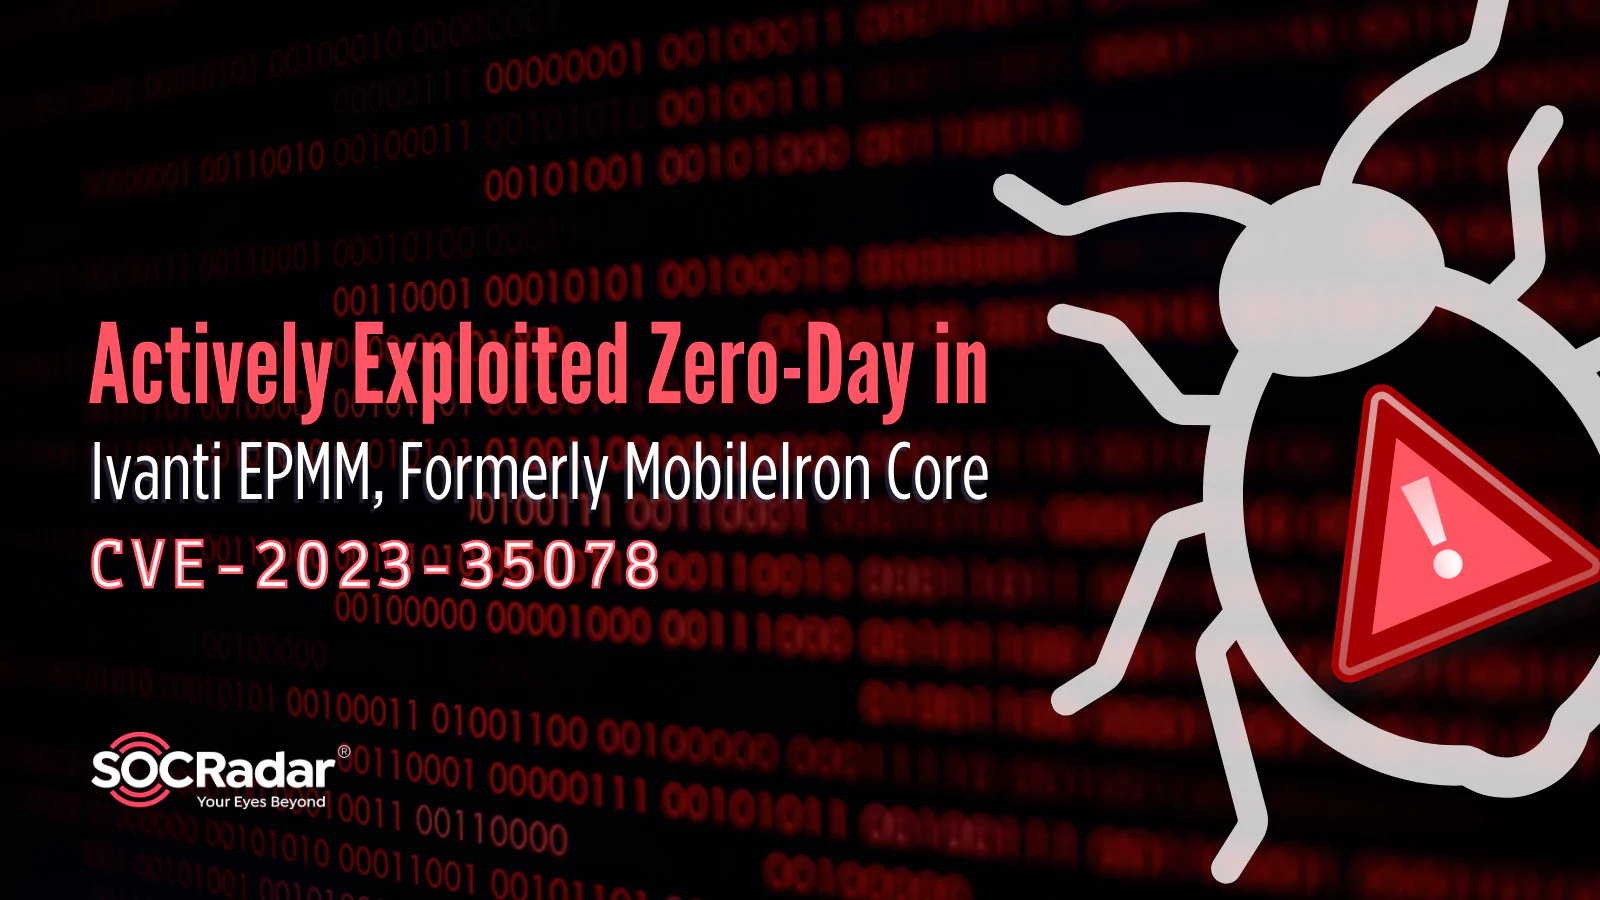 SOCRadar® Cyber Intelligence Inc. | Critical Zero-Day in Ivanti EPMM (Formerly MobileIron Core) Is Actively Exploited (CVE-2023-35078)